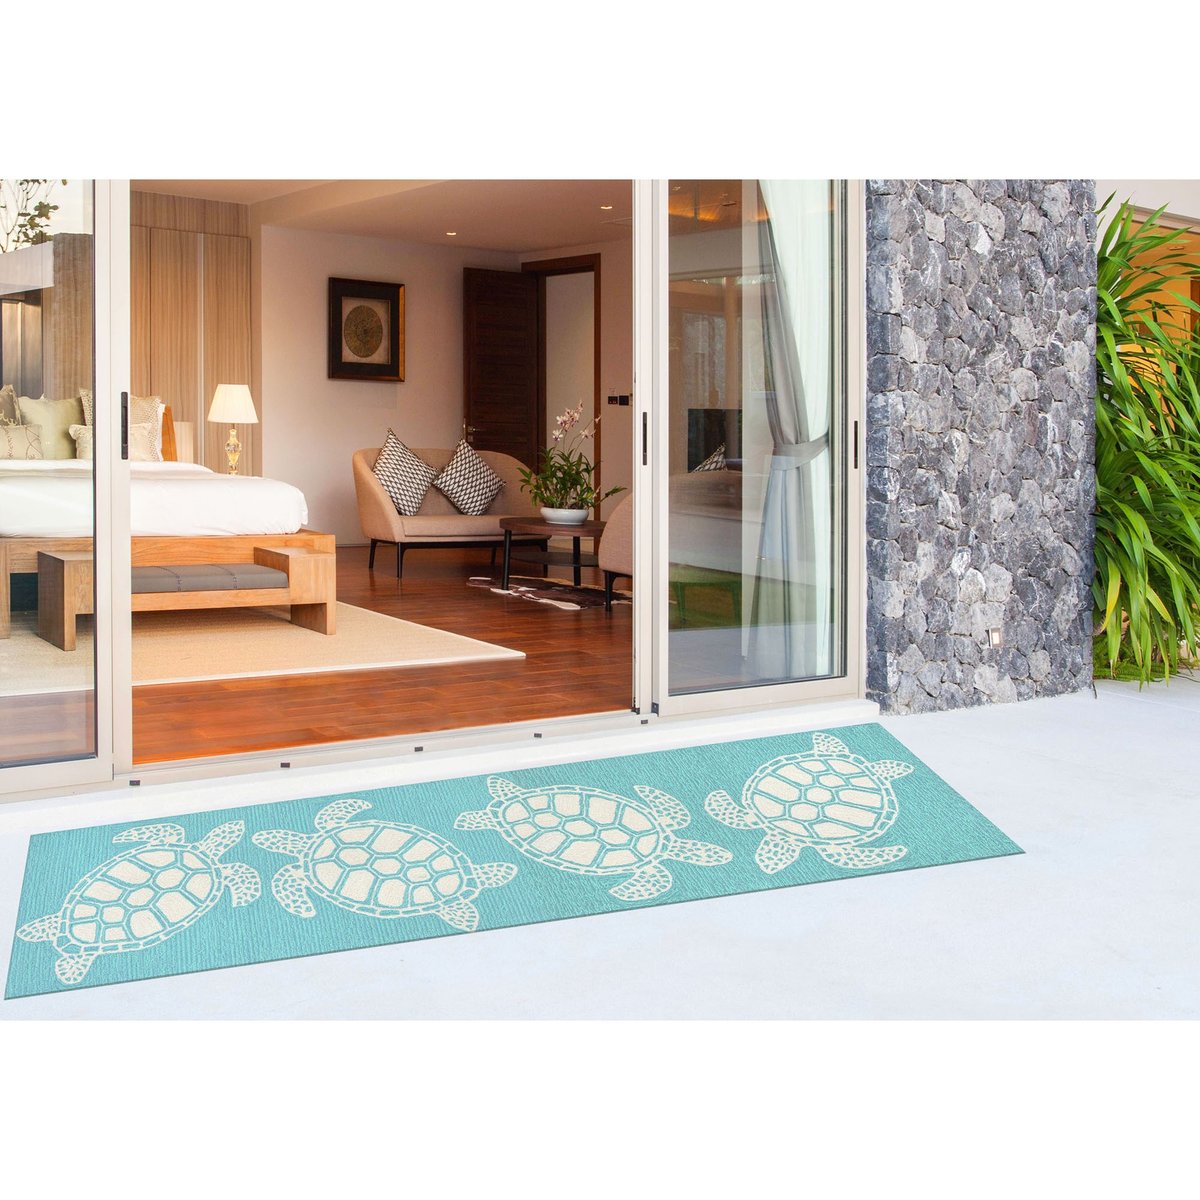 ALAZA Water Lily Frog Ocean Sea Non Slip Area Rug 5' x 7' for Living Dinning Room Bedroom Kitchen Hallway Office Modern Home Decorative 